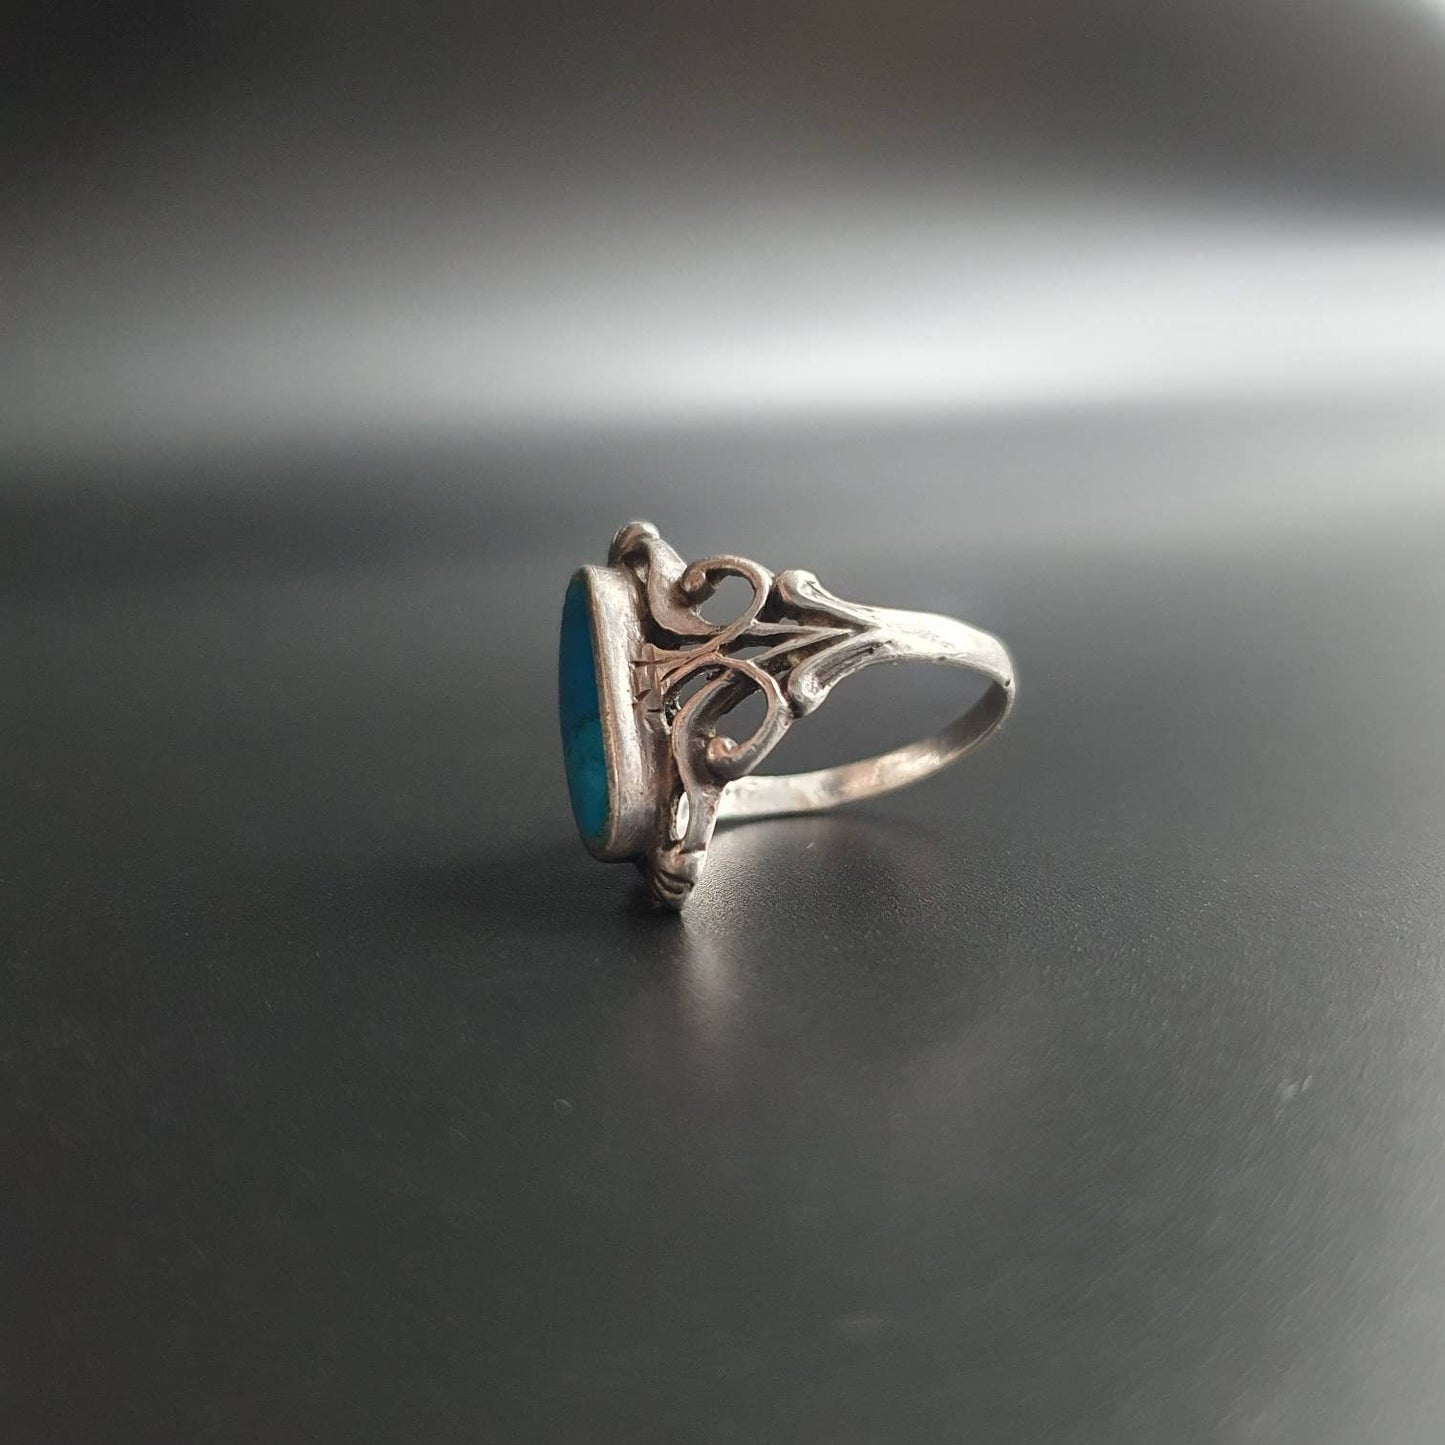 Antique ring, vintage handmade, jewelry, gifts, sterling silver, turquoise gemstone, ring, filigree ring, sterling silver jewelry,925,